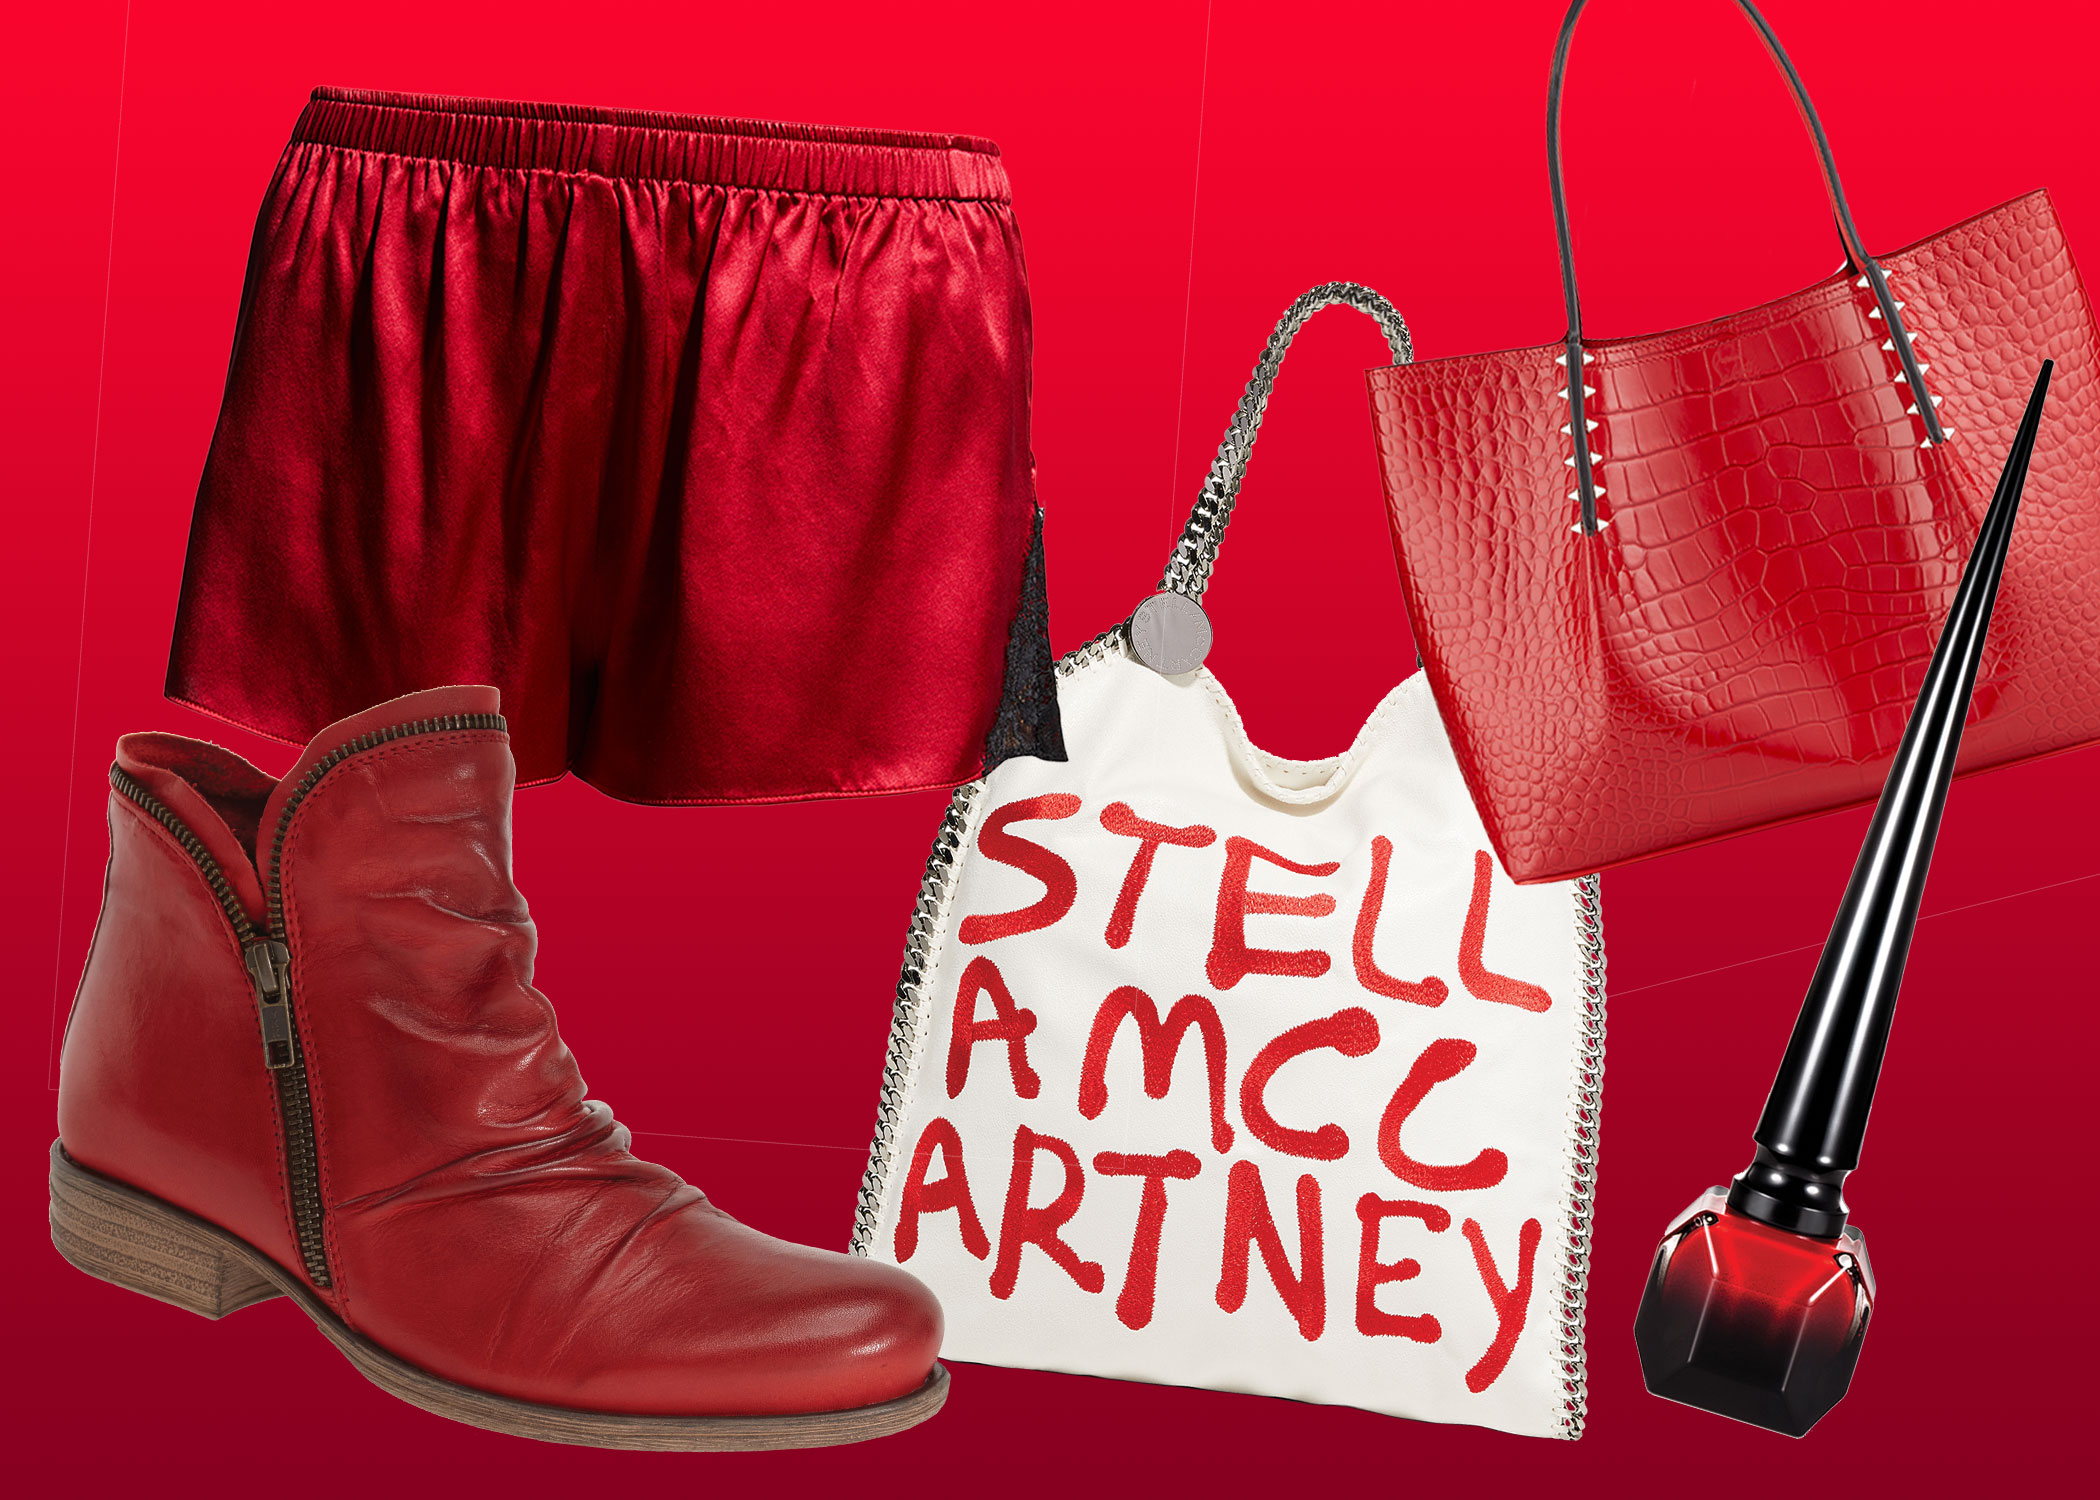 Bold Red Is in Fashion This Year. Here’s What to Buy on Trend When Shopping in Tysons